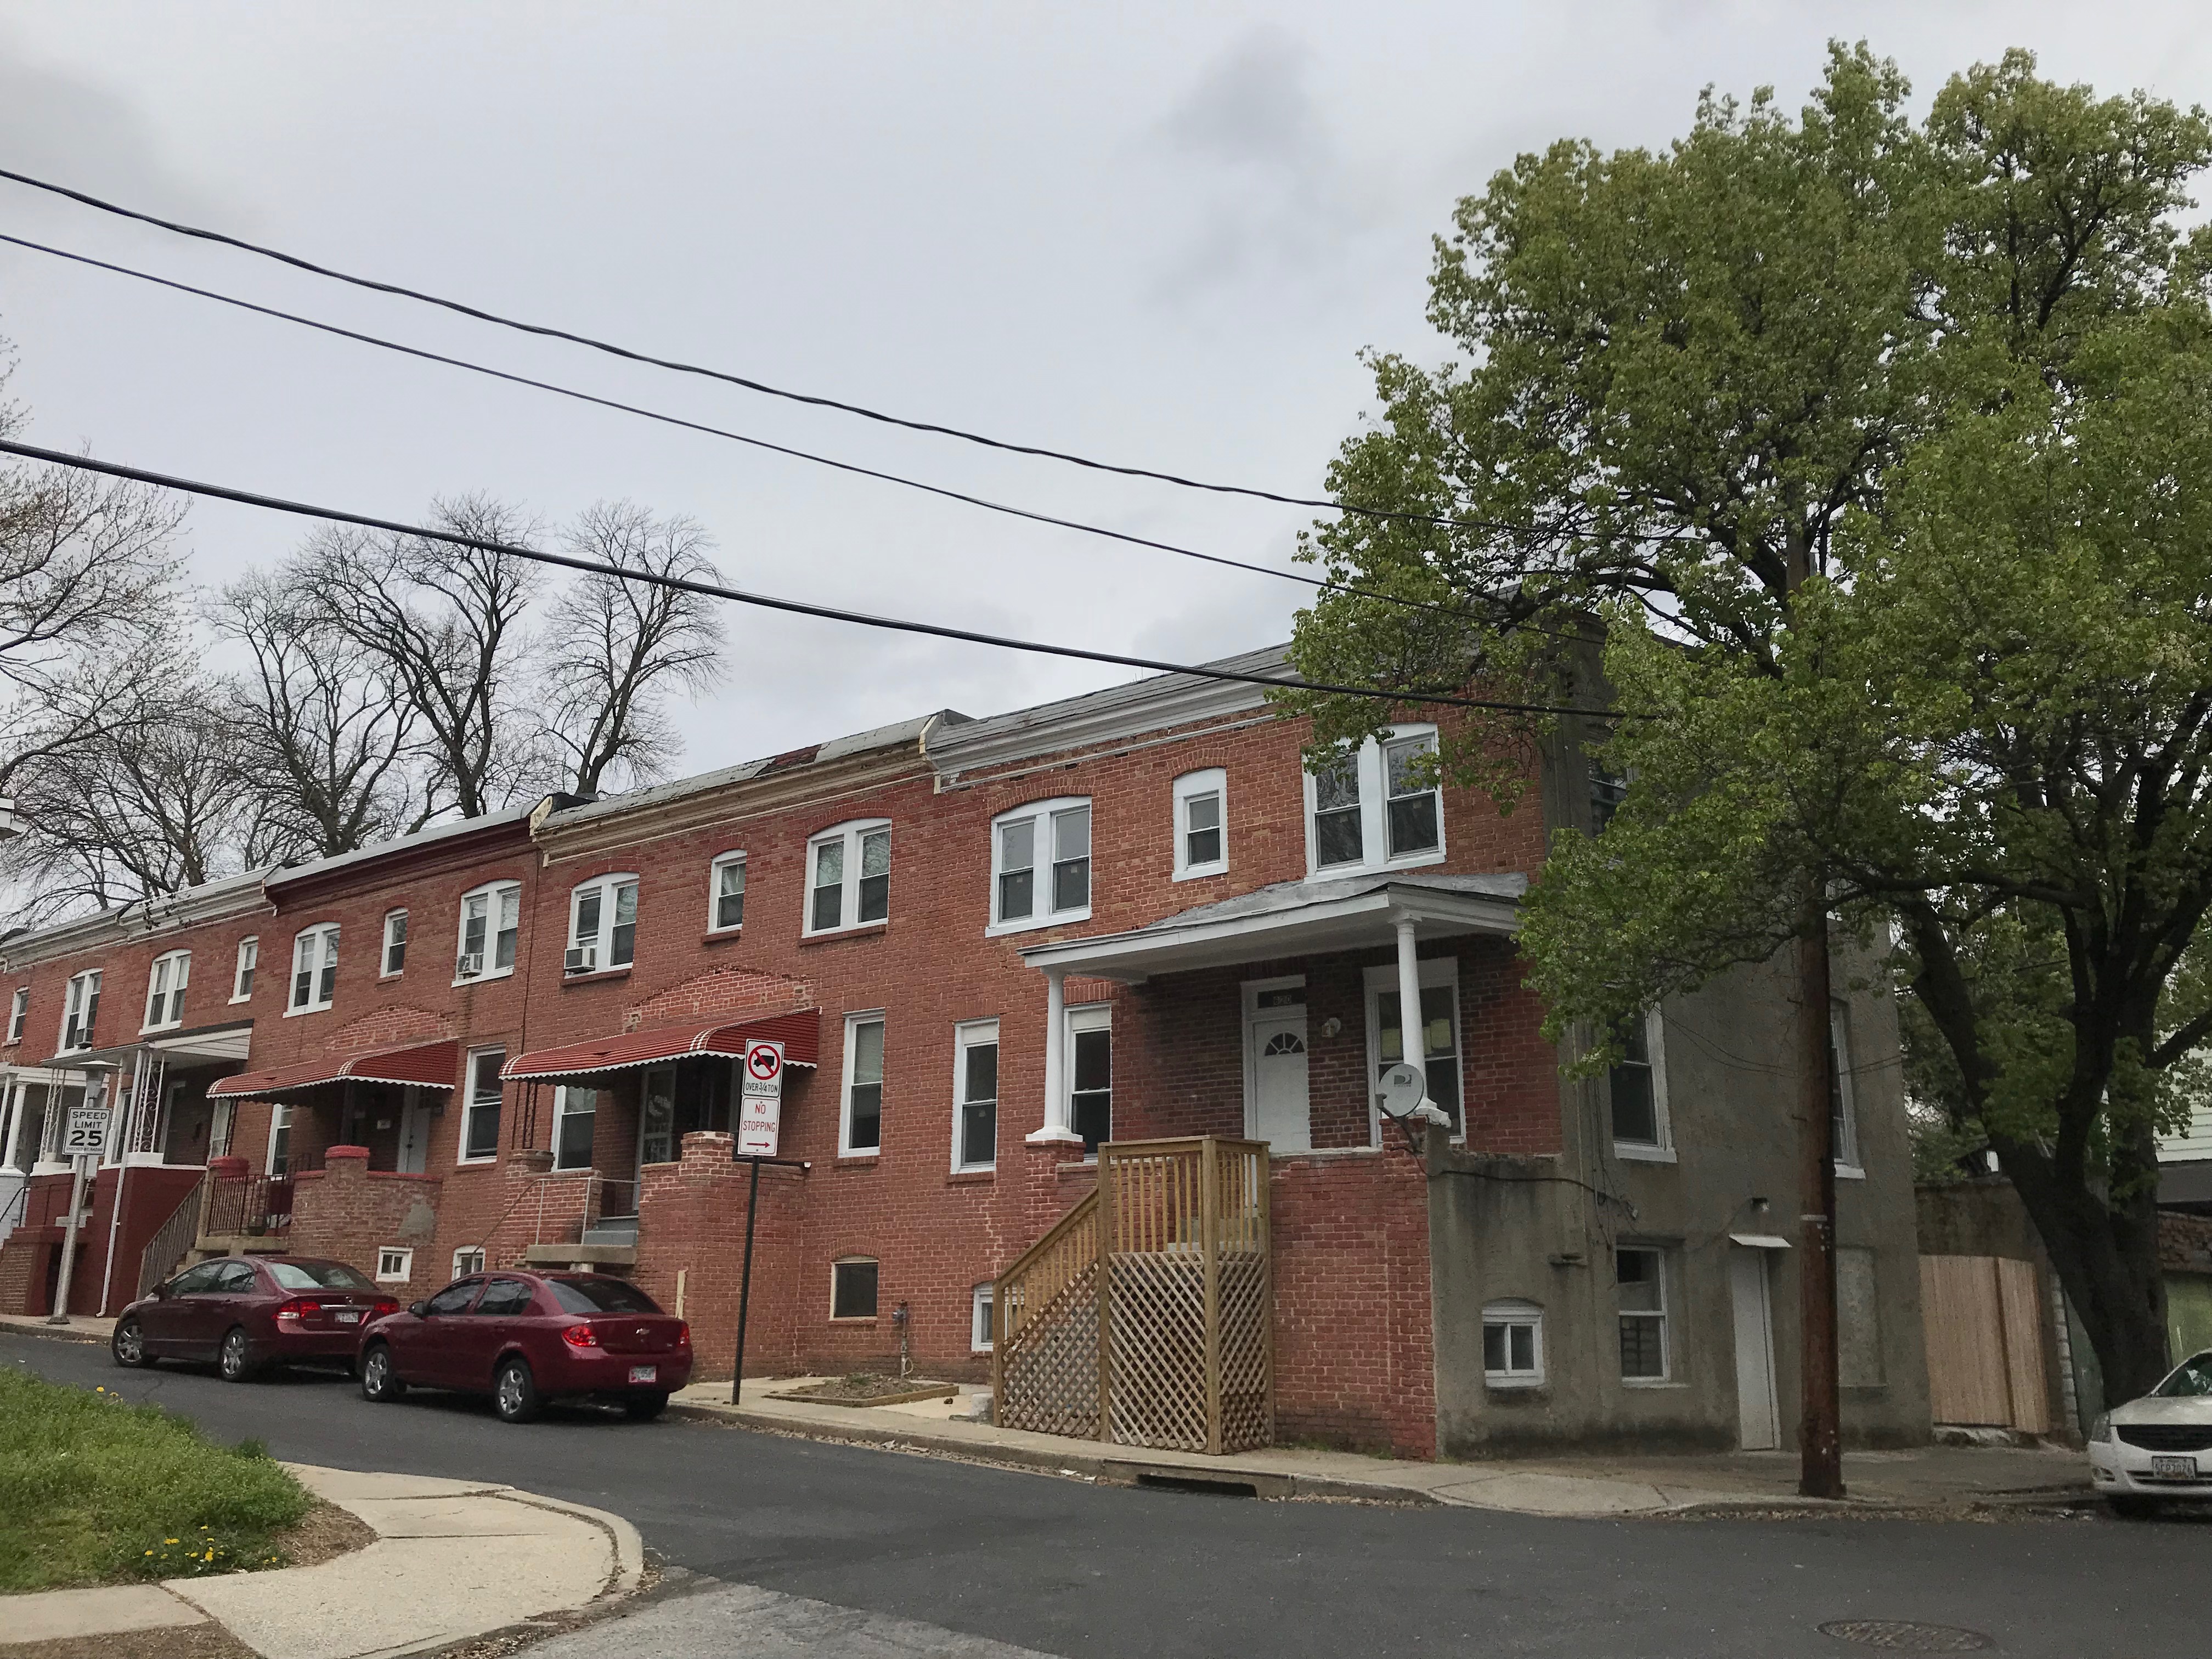 Rowhouses, Montpelier Street and Frisby Street (northeast corner), Baltimore, MD 21218, Architecture, Baltimore, Better Waverly, Building, HQ Photo